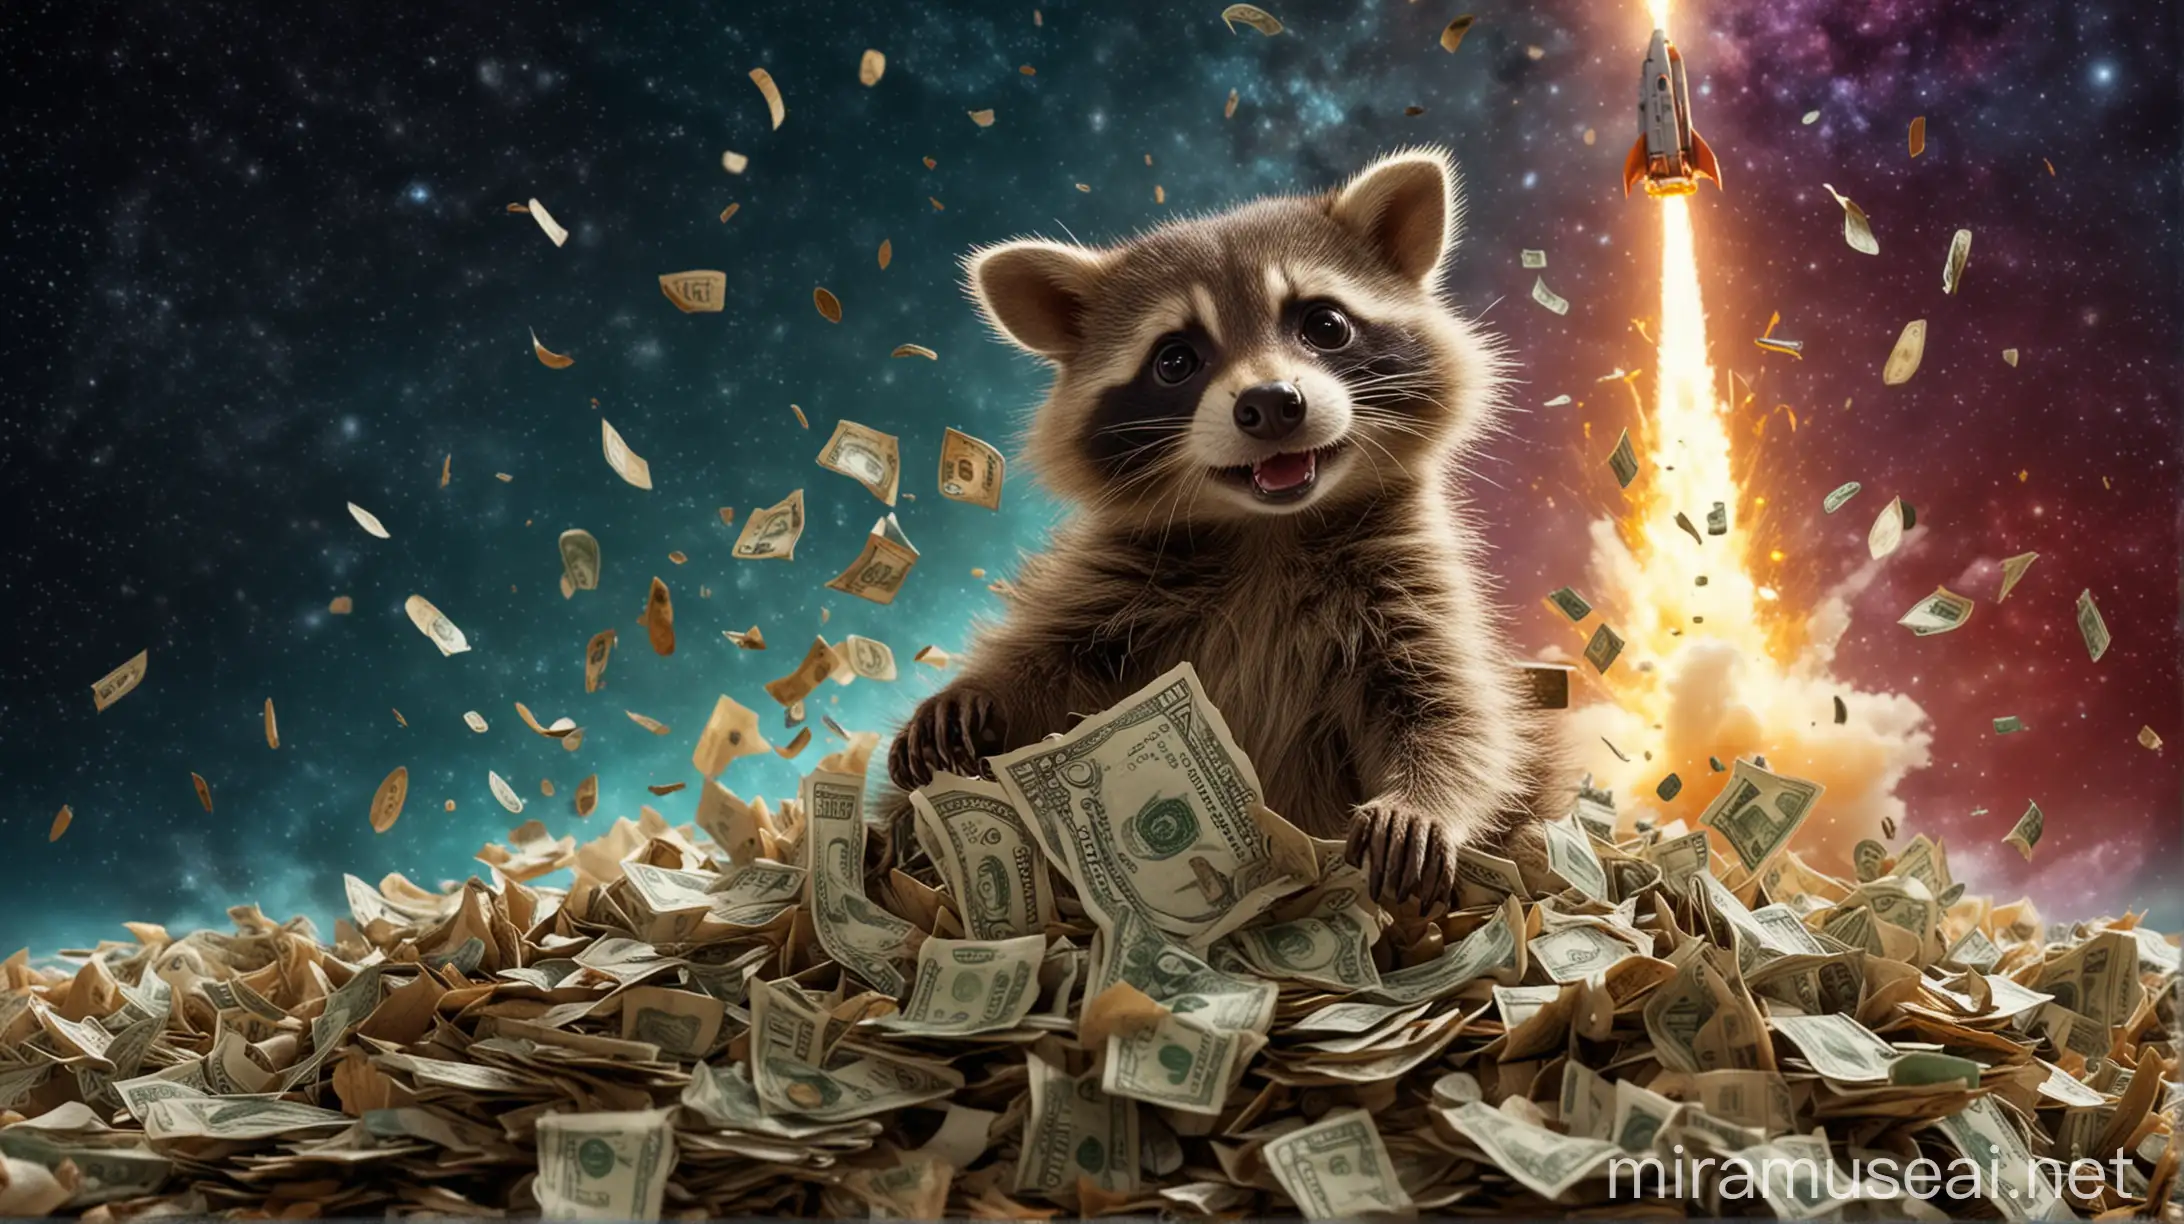 hyperrealistic photo, baby raccoon pedro, With stacks of cash money, flying on a rocket trough vibrant space, cinematic image, --ar 16:9